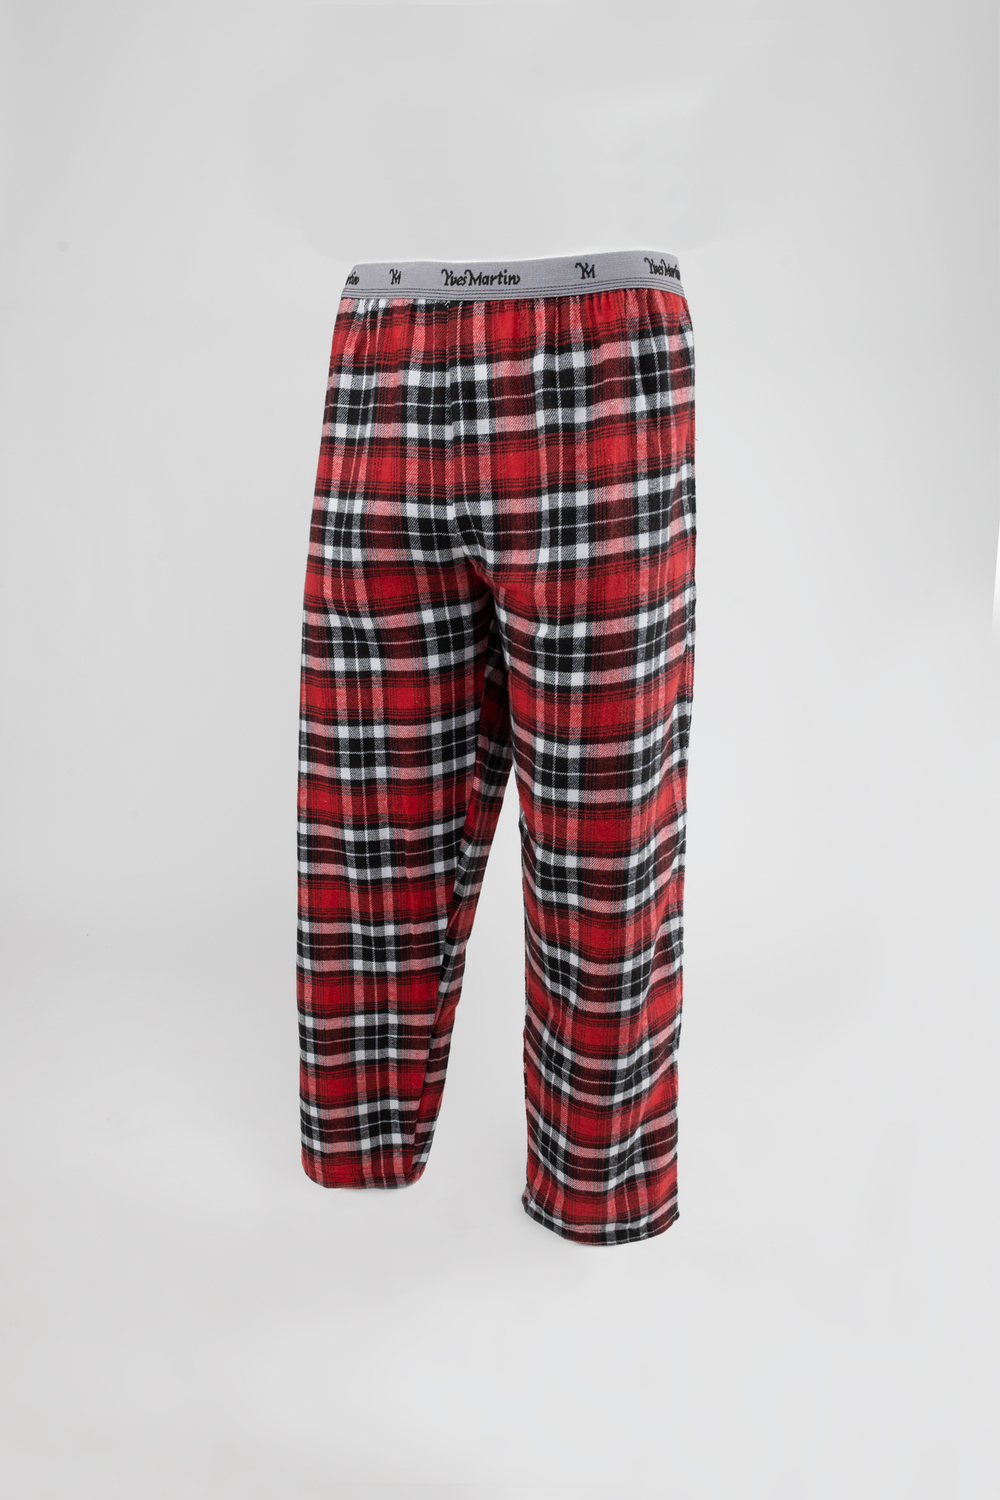 Yves Martin - Flannel sleep pants, red plaid - Plus Size. Colour